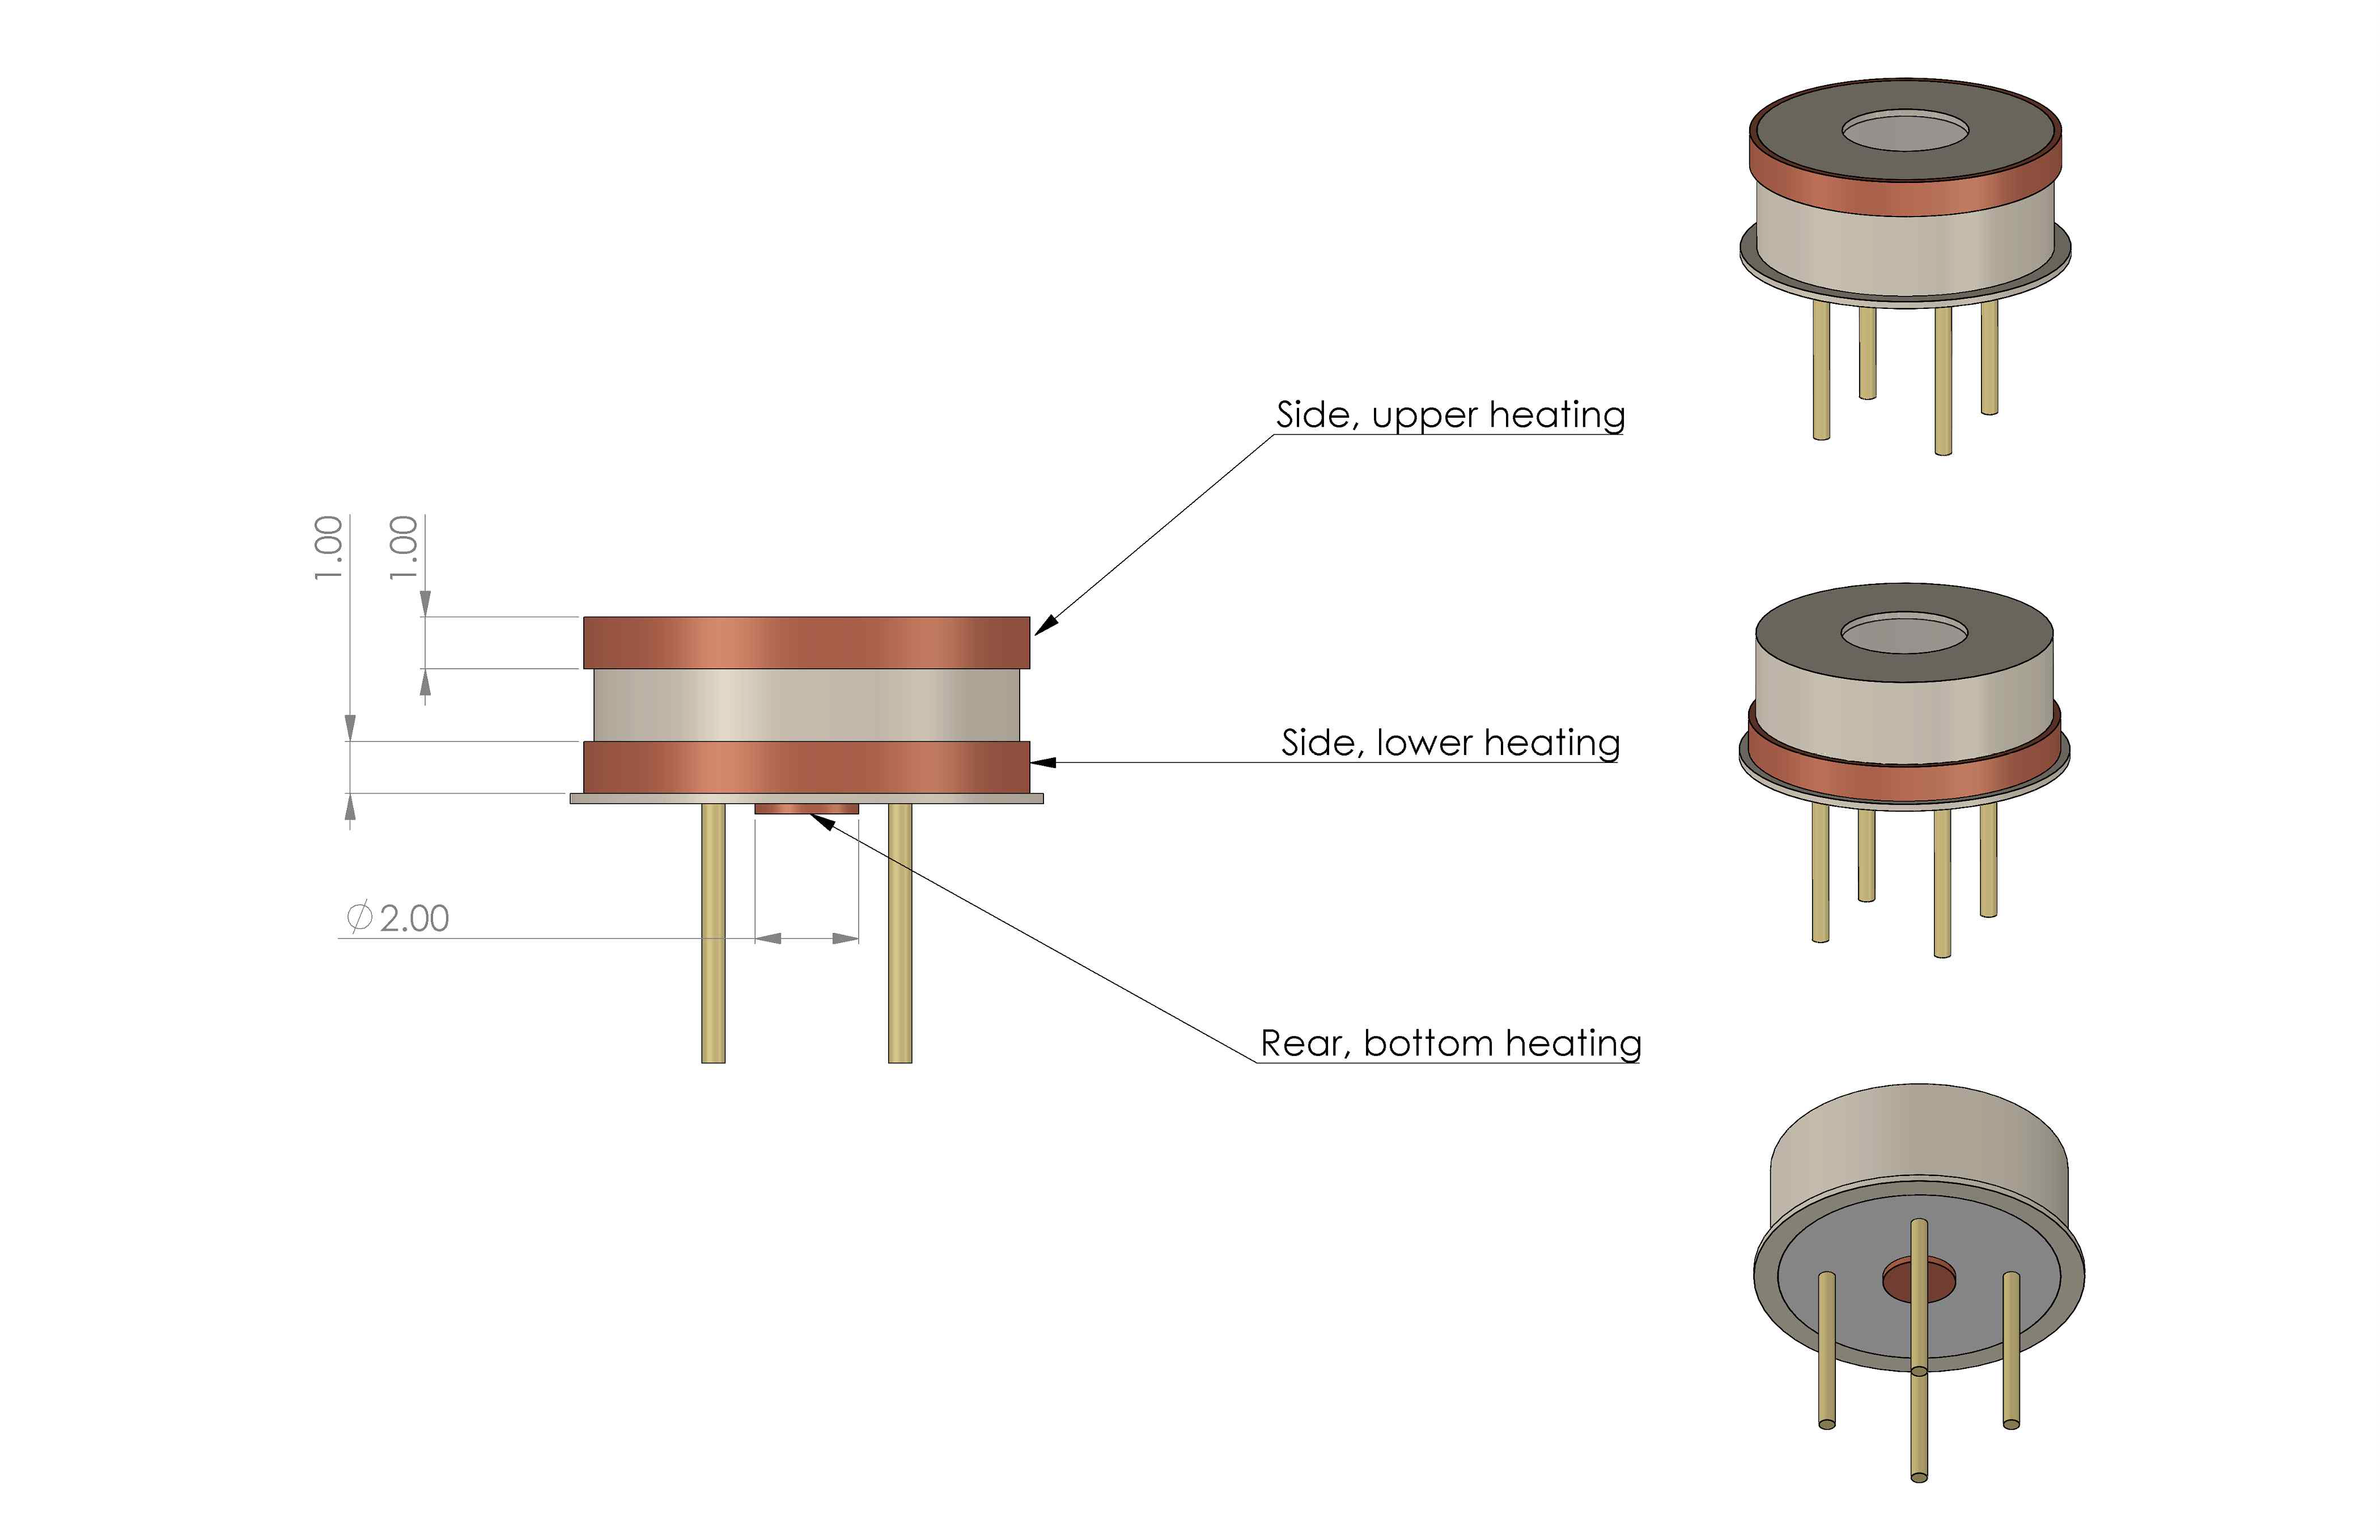 Locations of the heating element compared in the numerical analysis